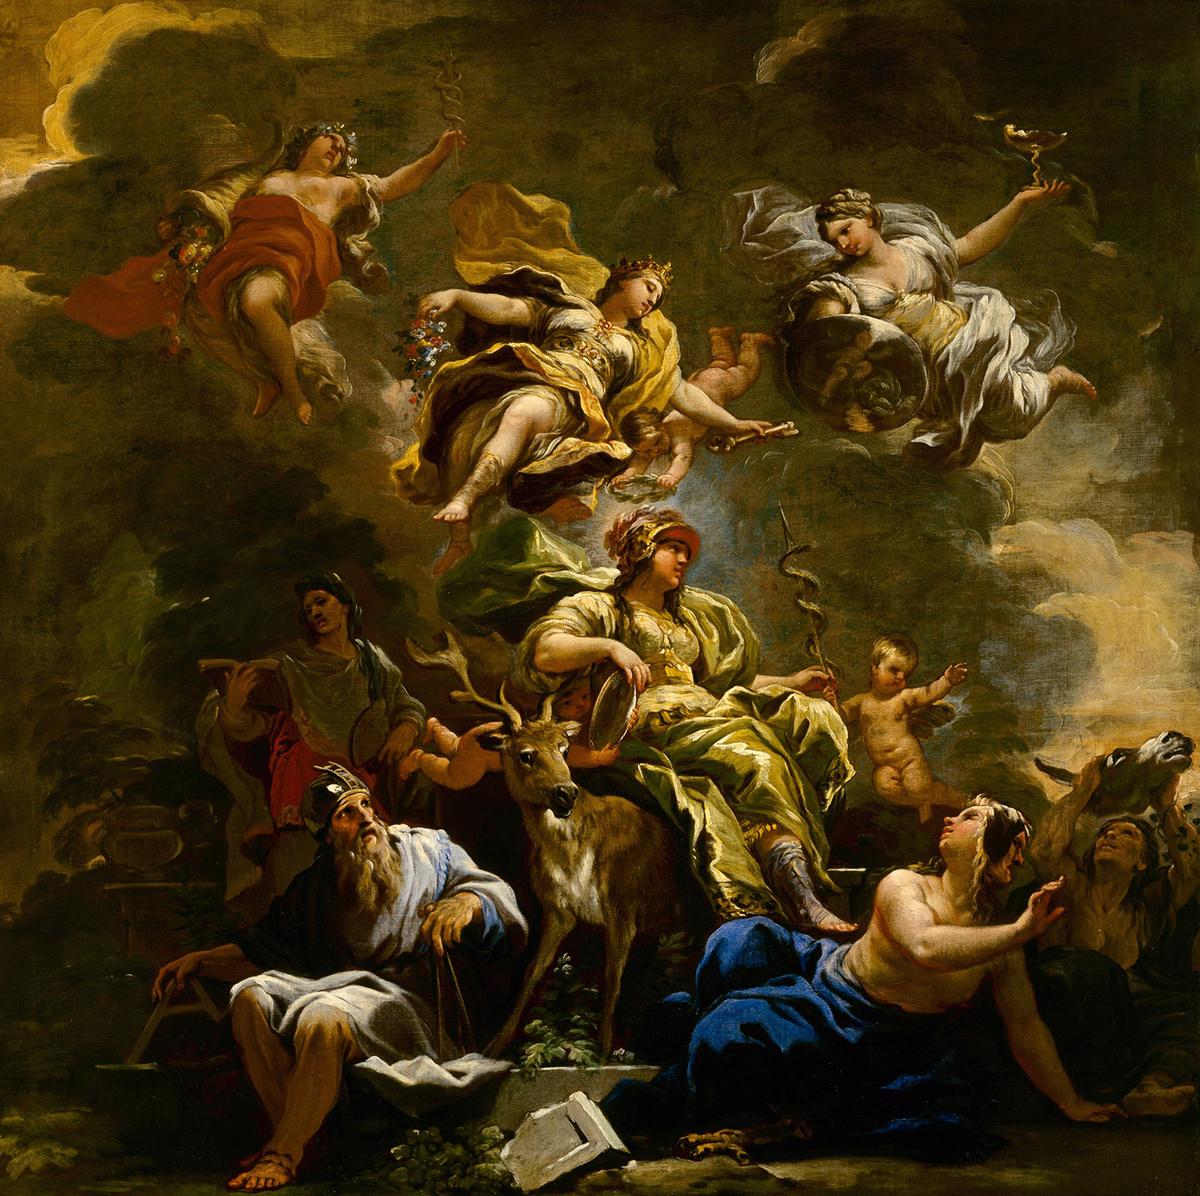 Goodwill and generosity unbuttressed by prudence can lead to evil and death. "Allegory of Prudence," circa 1682, by Luca Giordano. Oil on canvas. Museum of Fine Arts, Houston. (Public Domain)